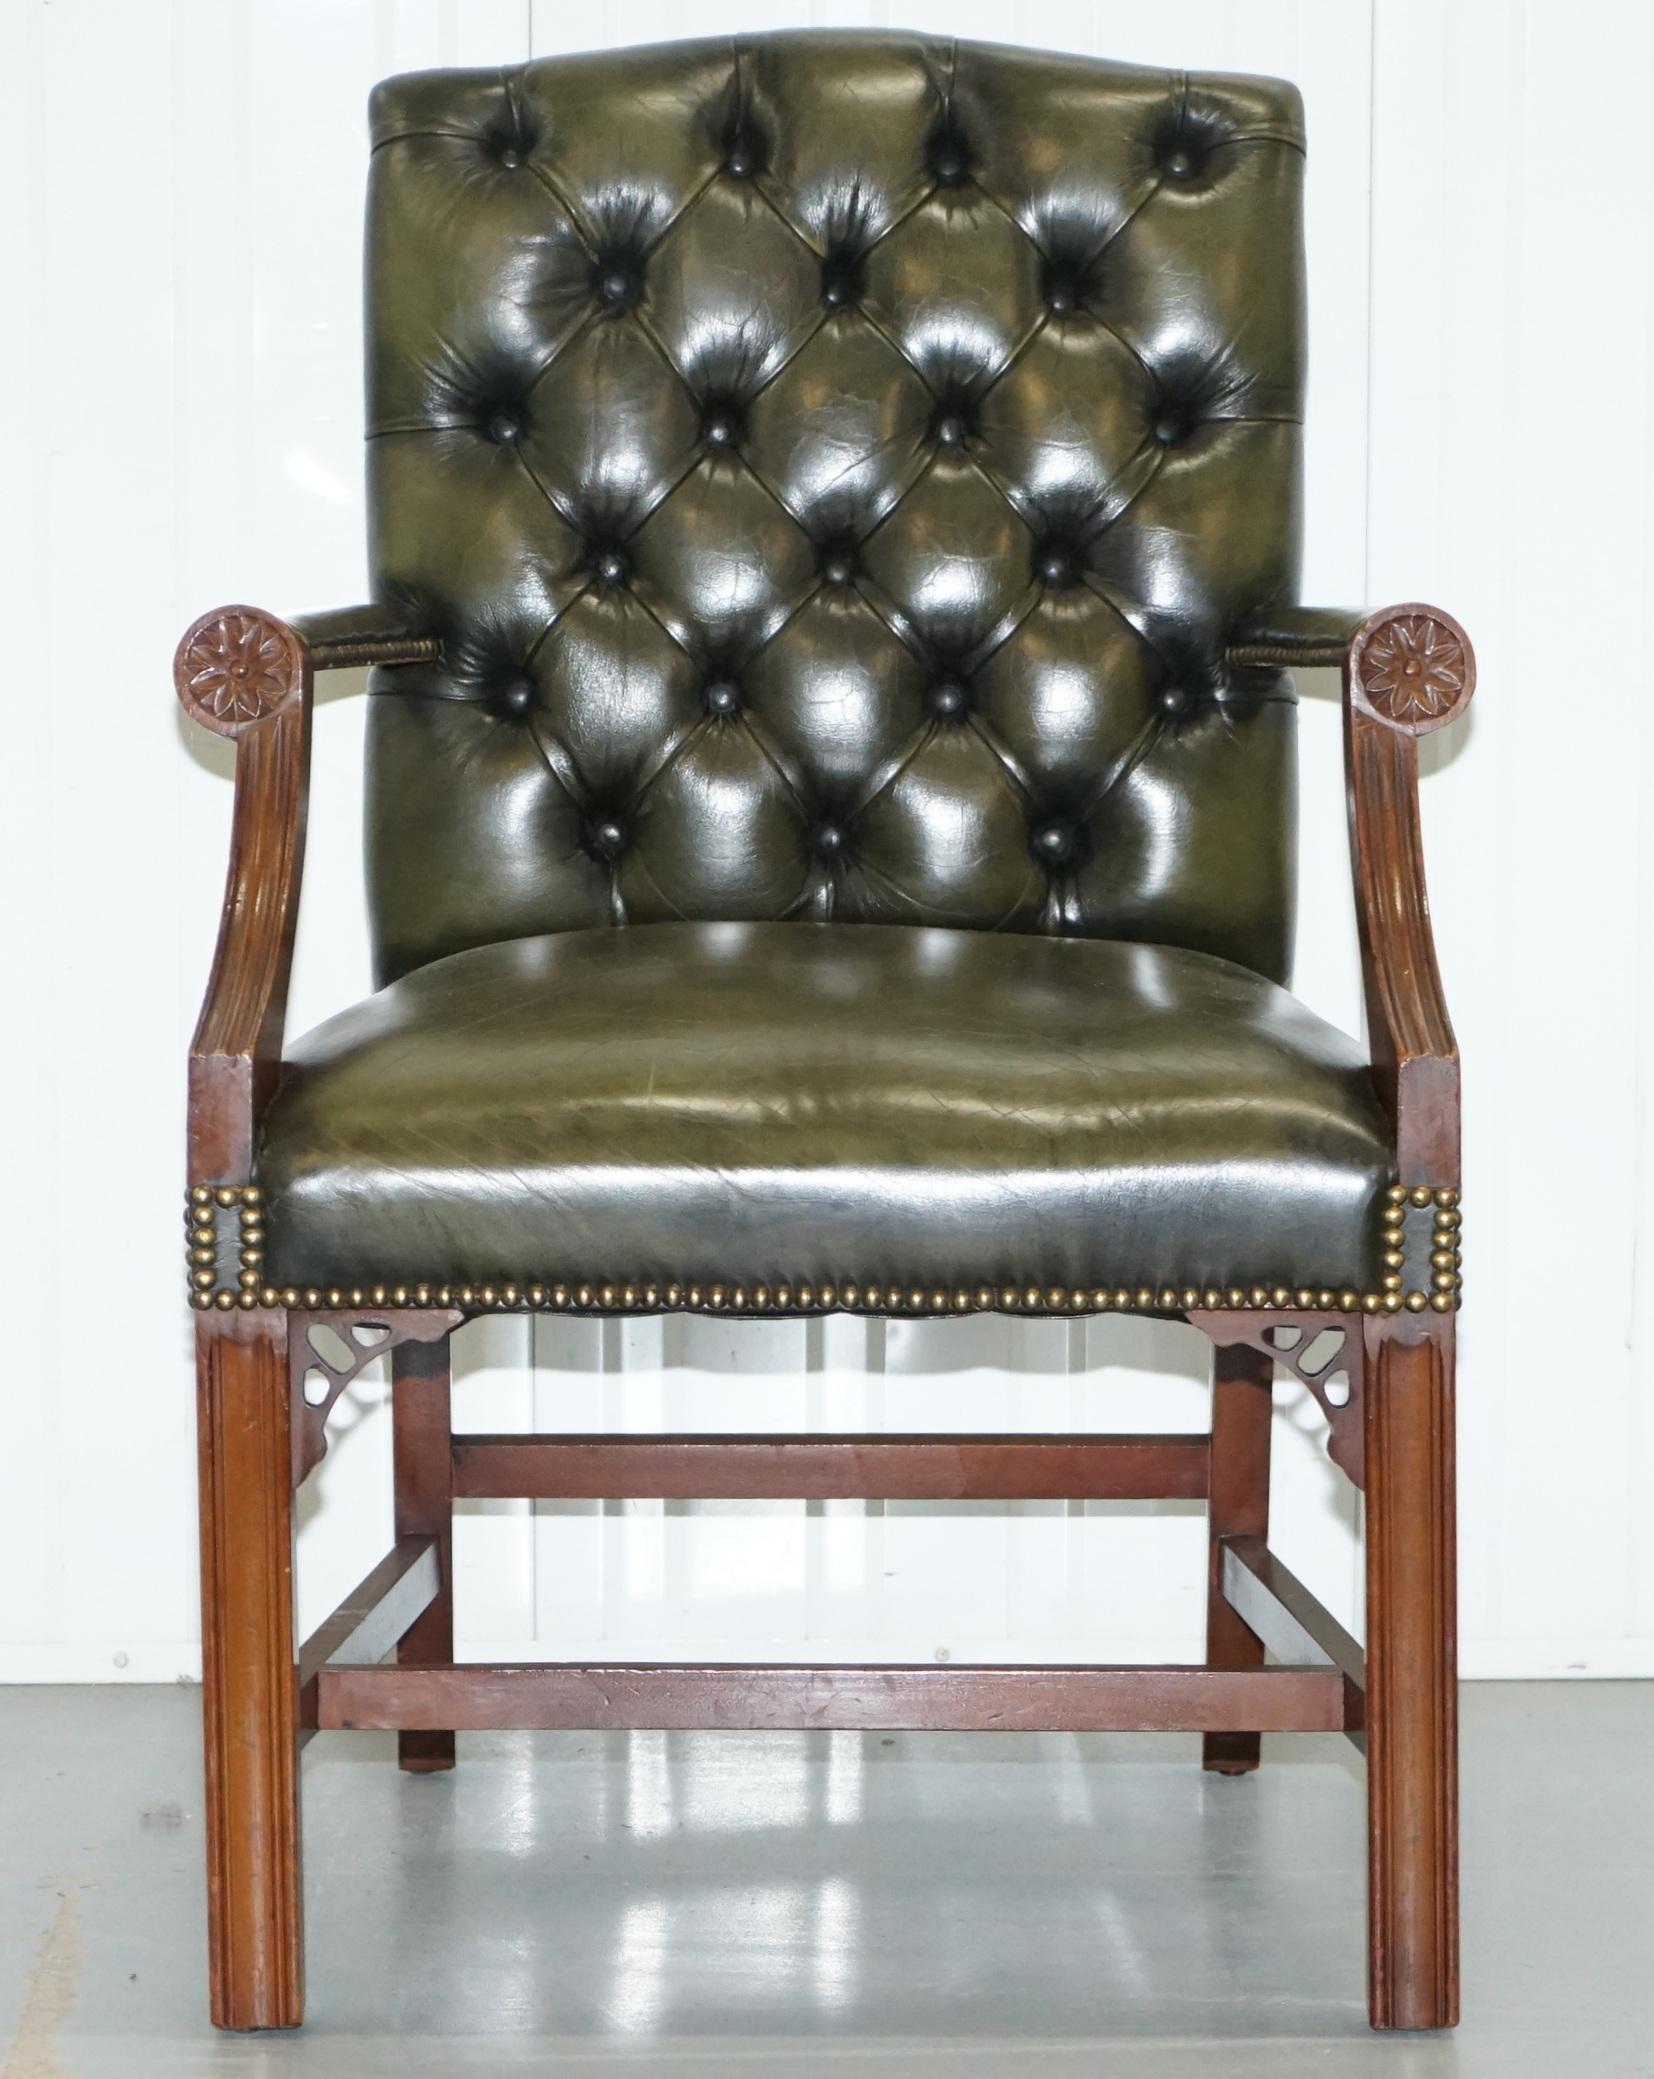 We are delighted to offer for sale this lovely aged green leather Chesterfield Gainsborough carver armchair with solid mahogany frames and fretwork carving in the manor of Thomas Chippendale 

A good looking and very comfortable chair, the frame